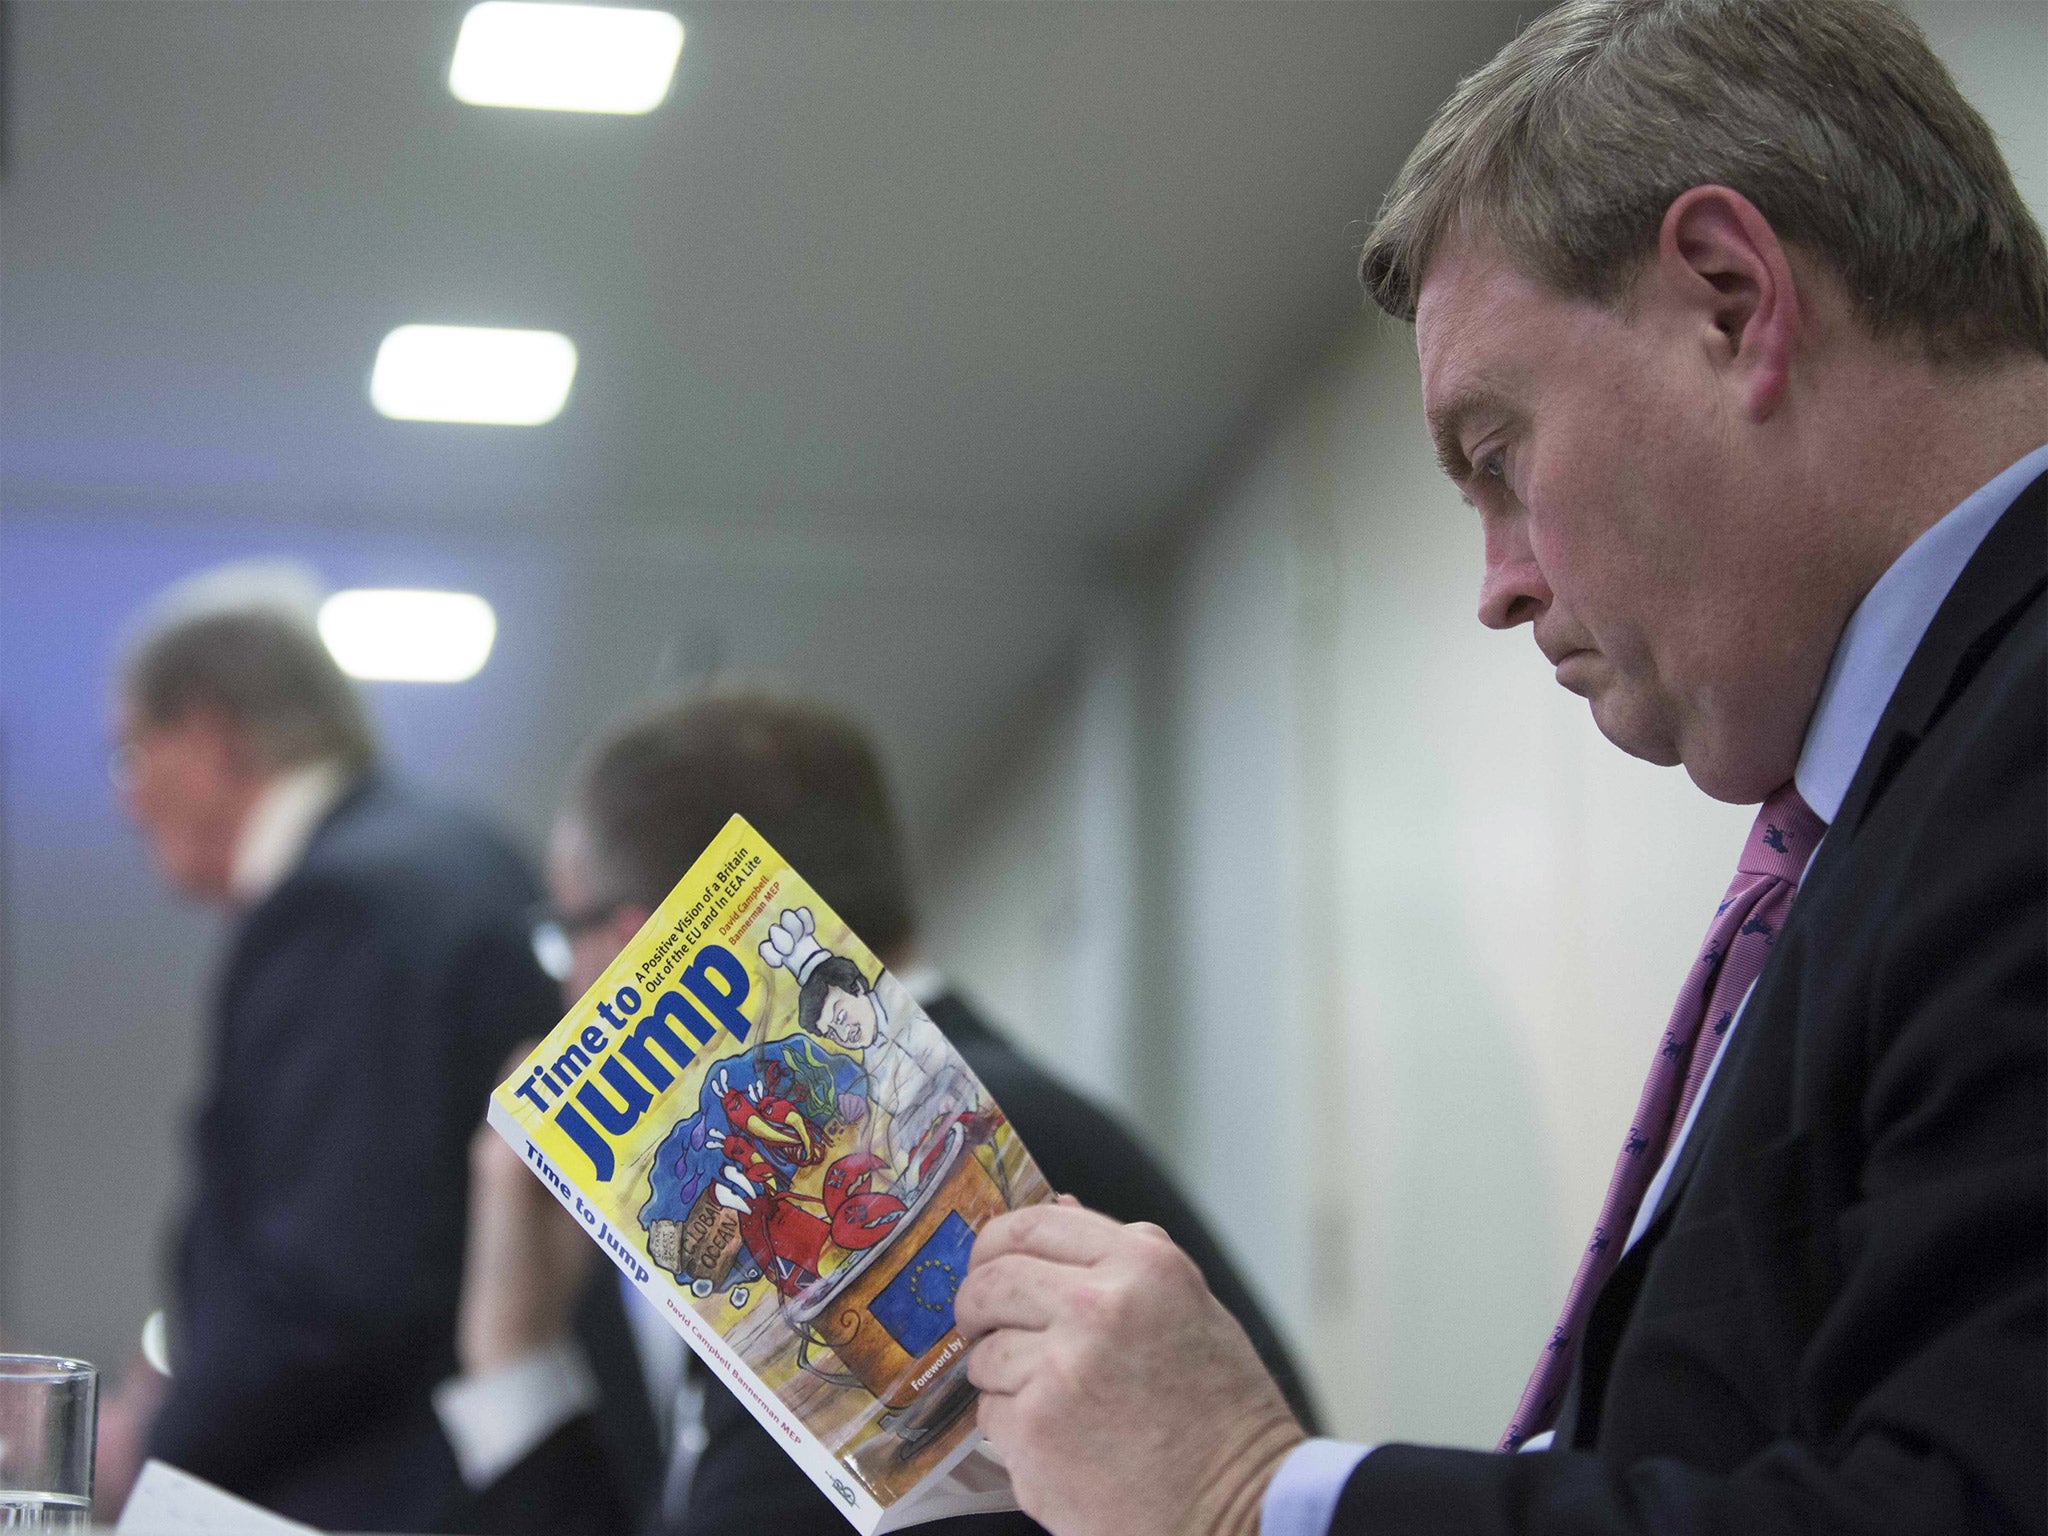 Conservative MEP David Campbell Bannerman with a copy of his book, 'Time to Jump', the cover of which shows a British lobster being boiled alive by Brussels